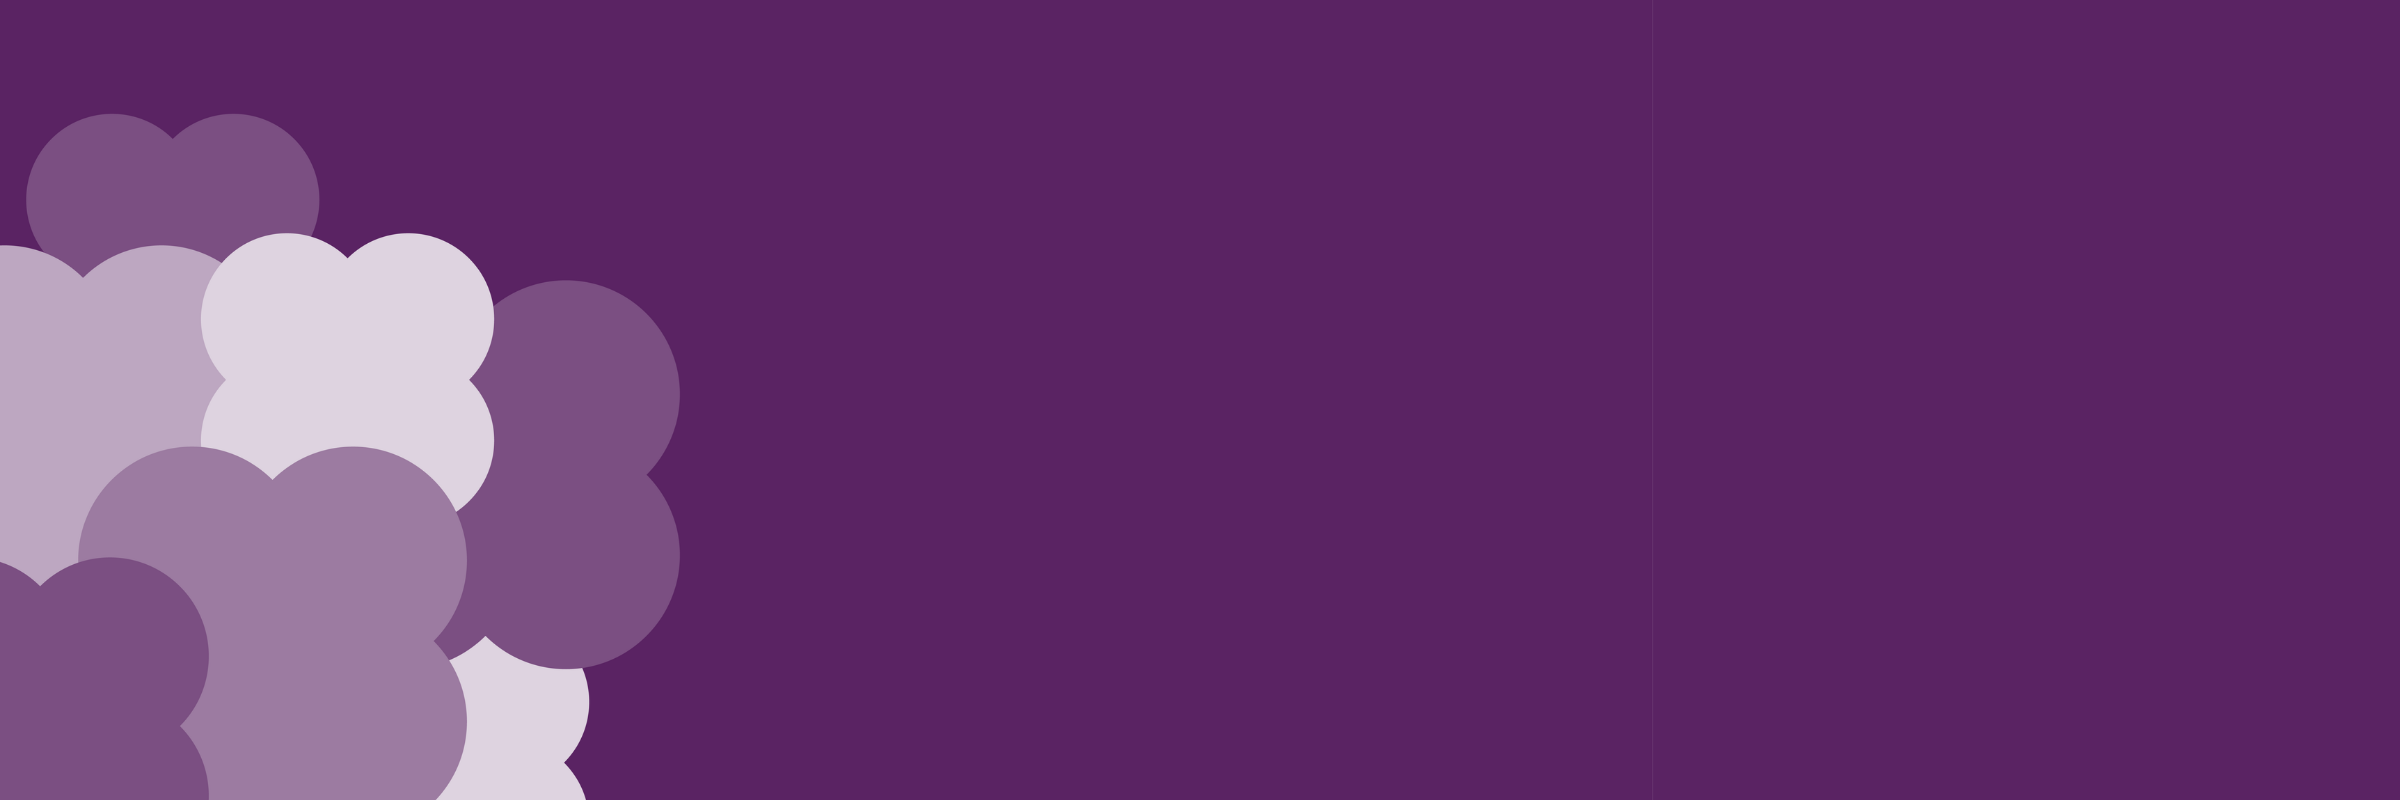 Safer Stronger portfolio banner - purple with differently shaded clover shapes.